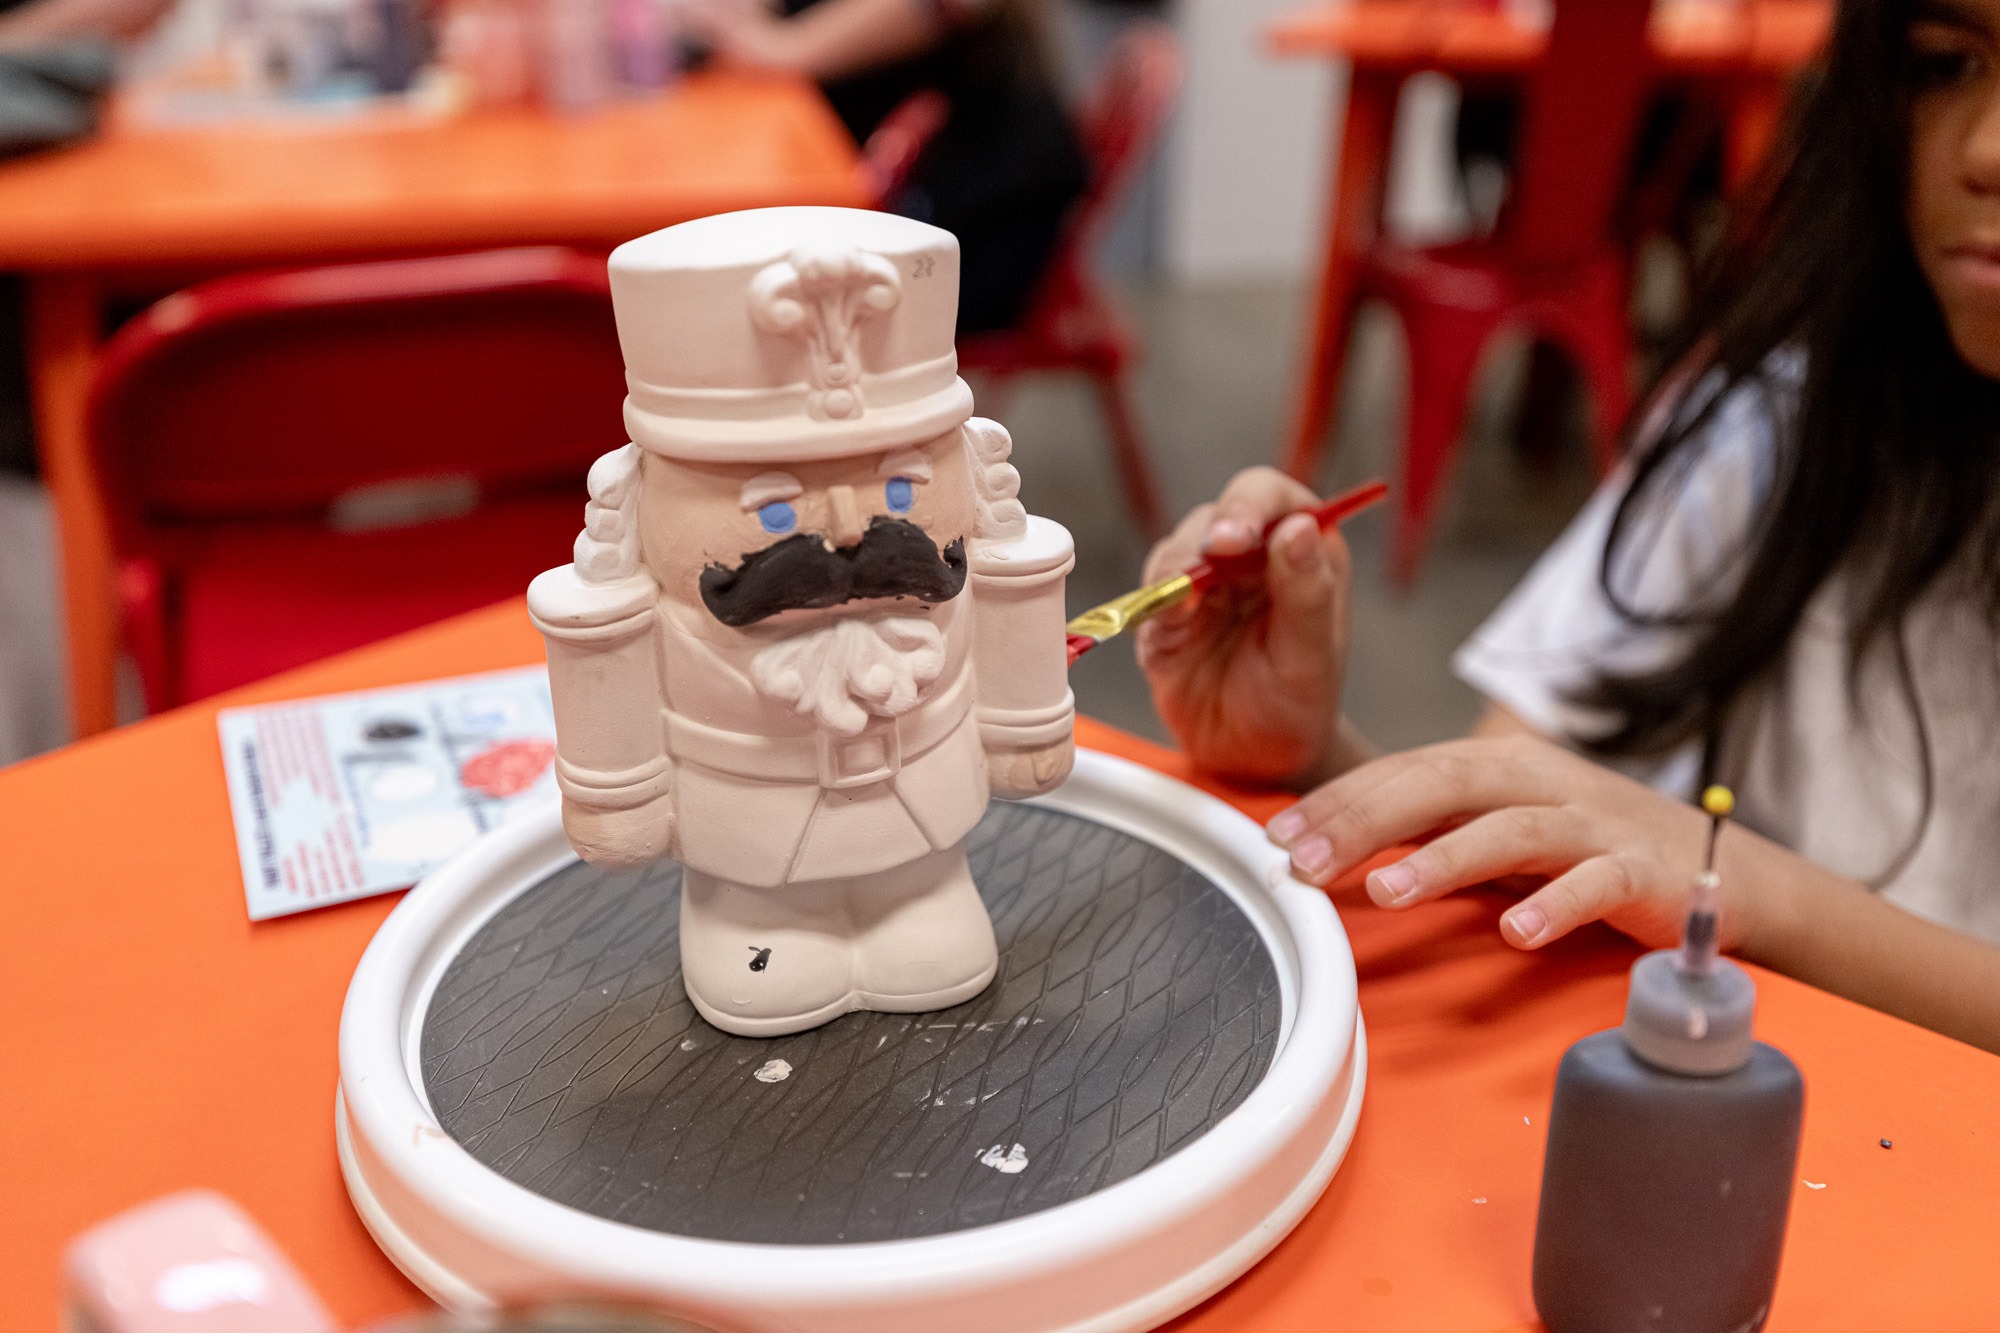 Enthusiastic pottery making at The Hot Spot Franchise, capturing the essence of creativity in the Paint Your Own Pottery Franchise